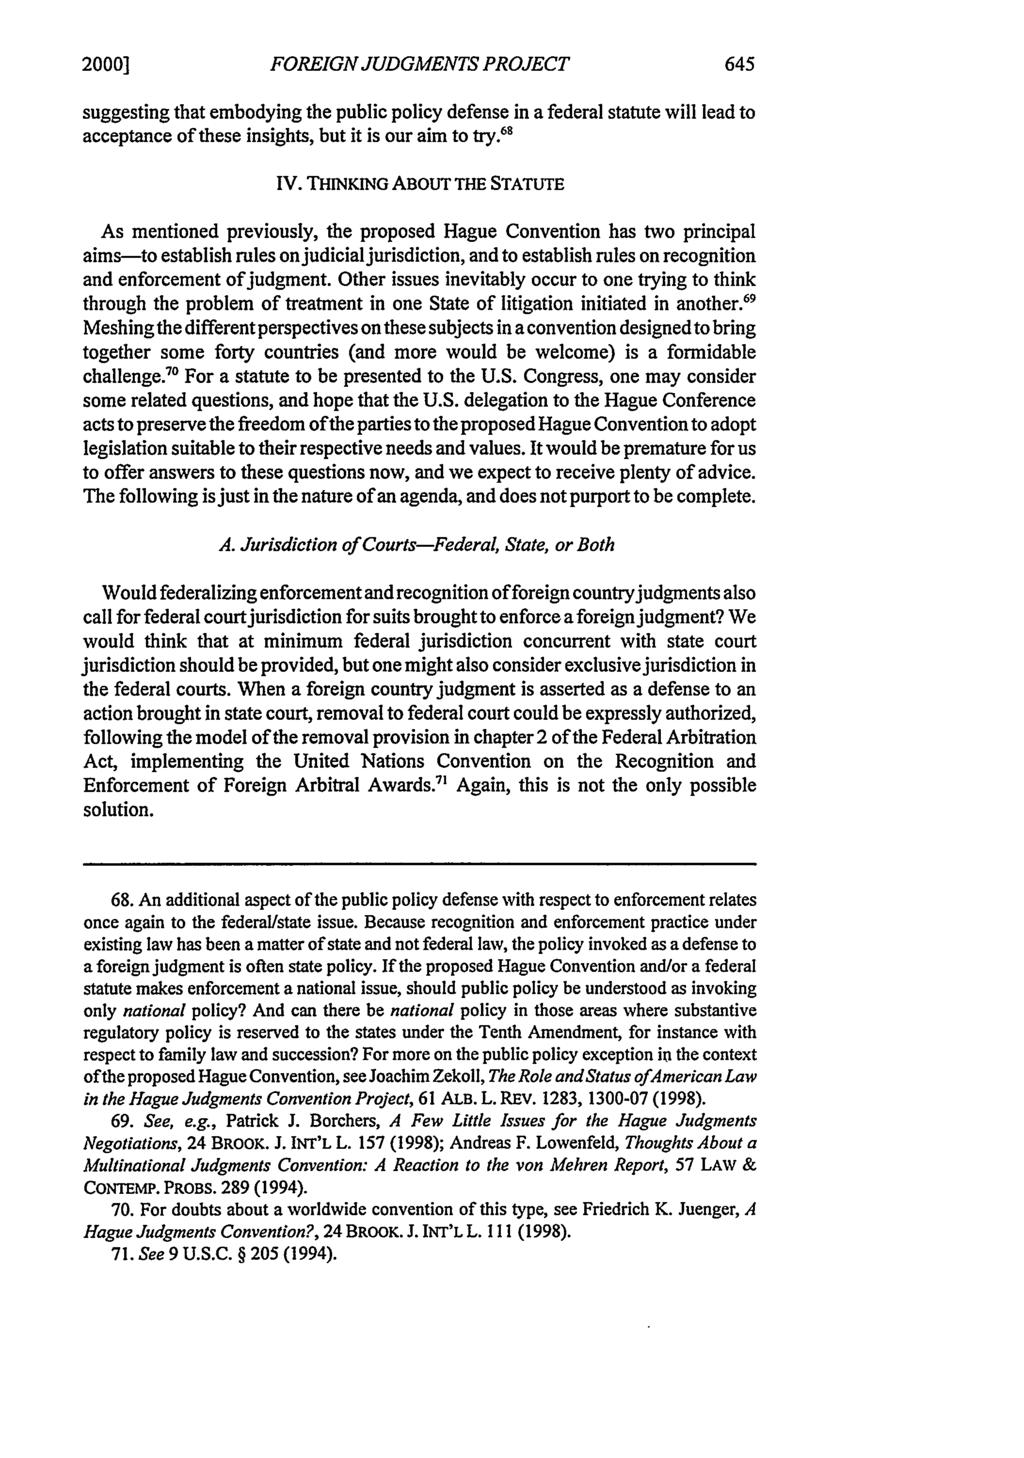 2000] FOREIGN JUDGMENTS PROJECT suggesting that embodying the public policy defense in a federal statute will lead to acceptance of these insights, but it is our aim to try. 6 IV.